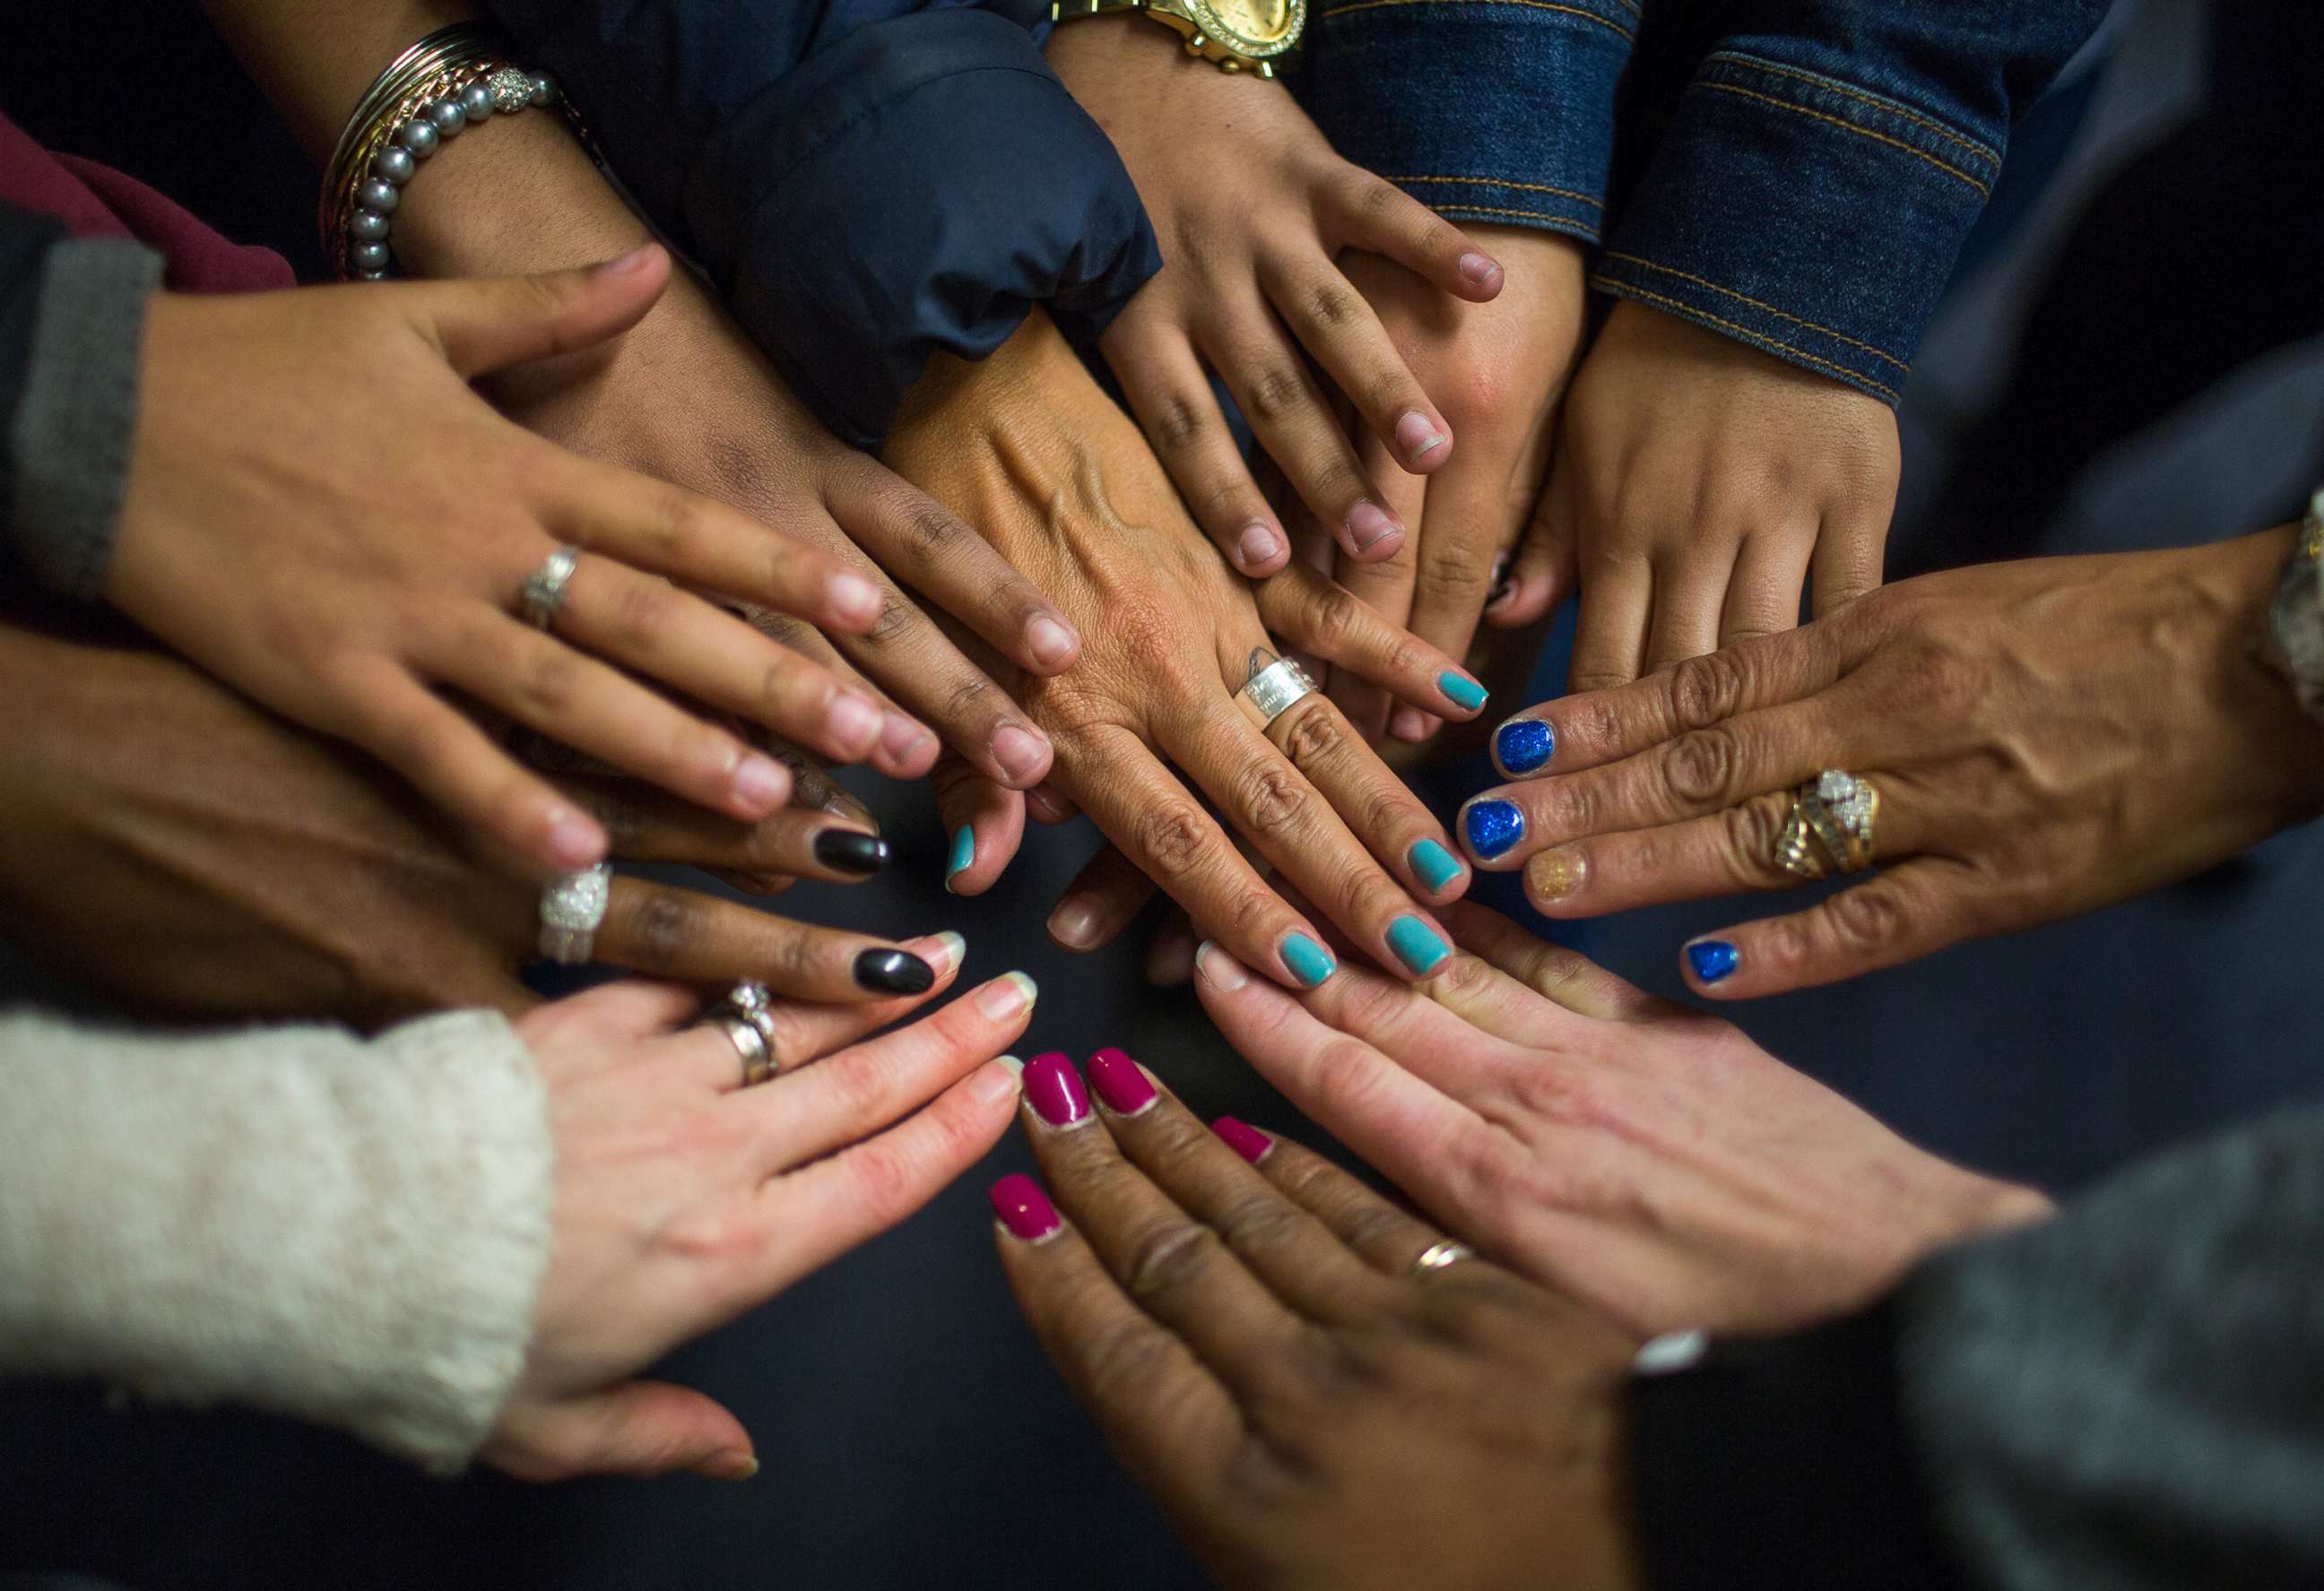 PHOTO: In a show of solidarity, unidentified victim of sex trafficking put their hands together during a meeting at My Life My Choice, an anti-human trafficking agency, Boston, March 24, 2016.